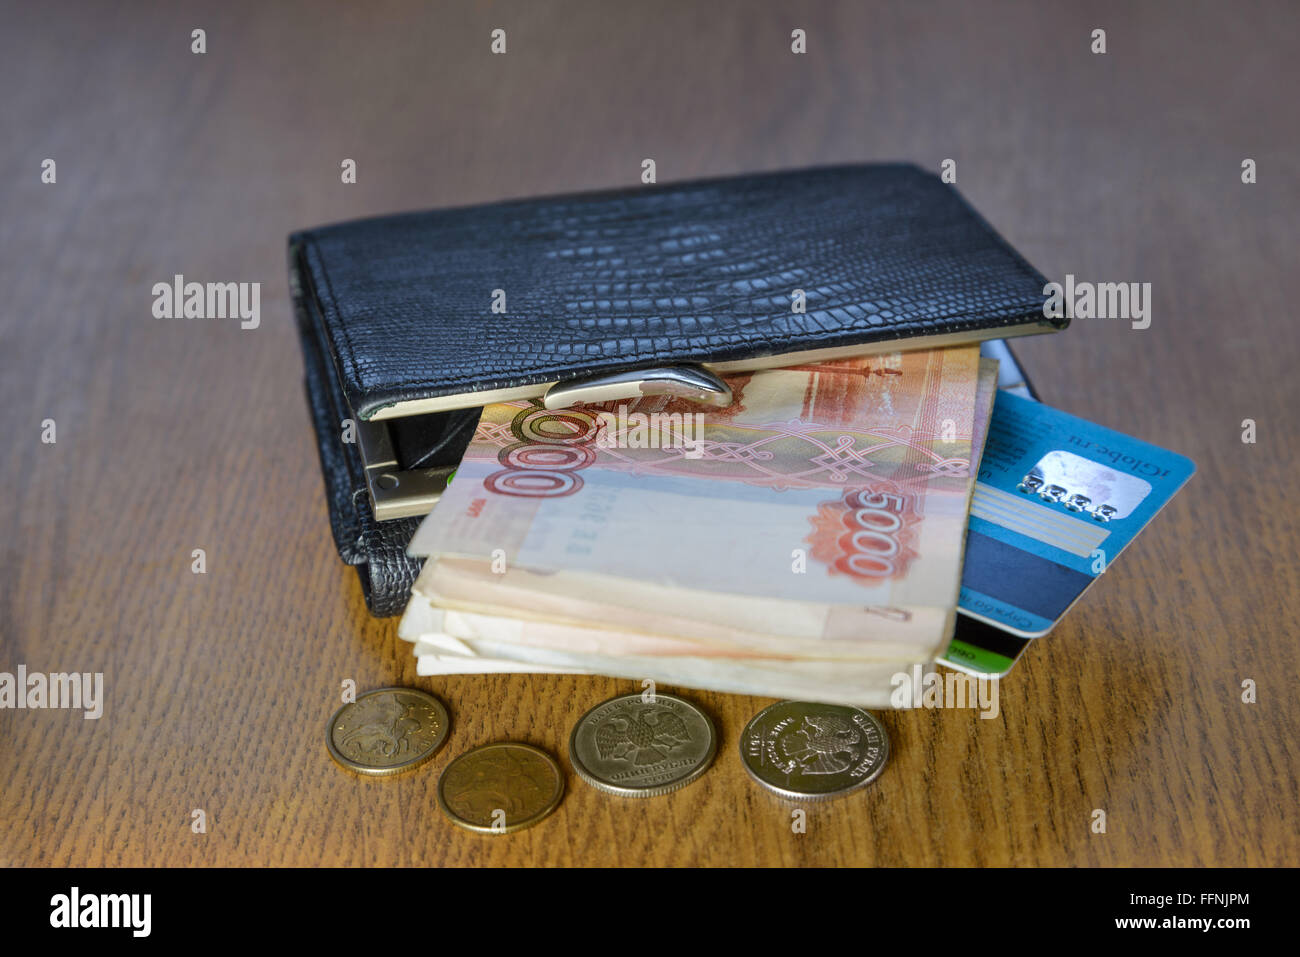 Wallet with credit cards and cash lying on a wooden table Stock Photo